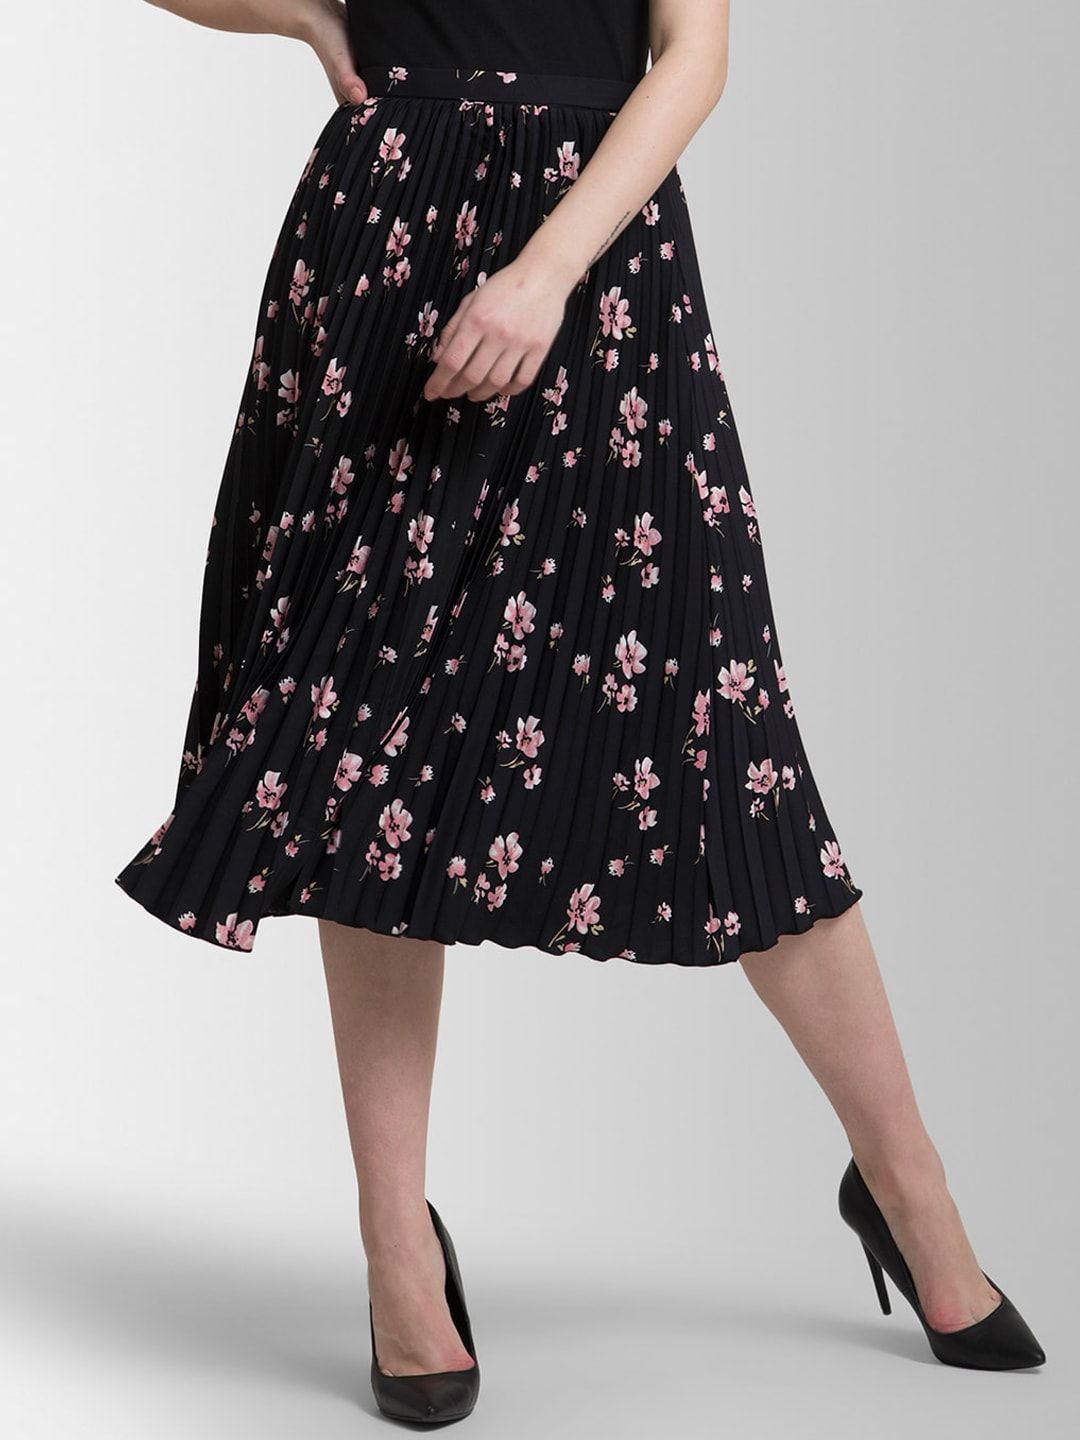 FableStreet Black & Pink Floral Printed Pleated A-Line Midi Skirt Price in India